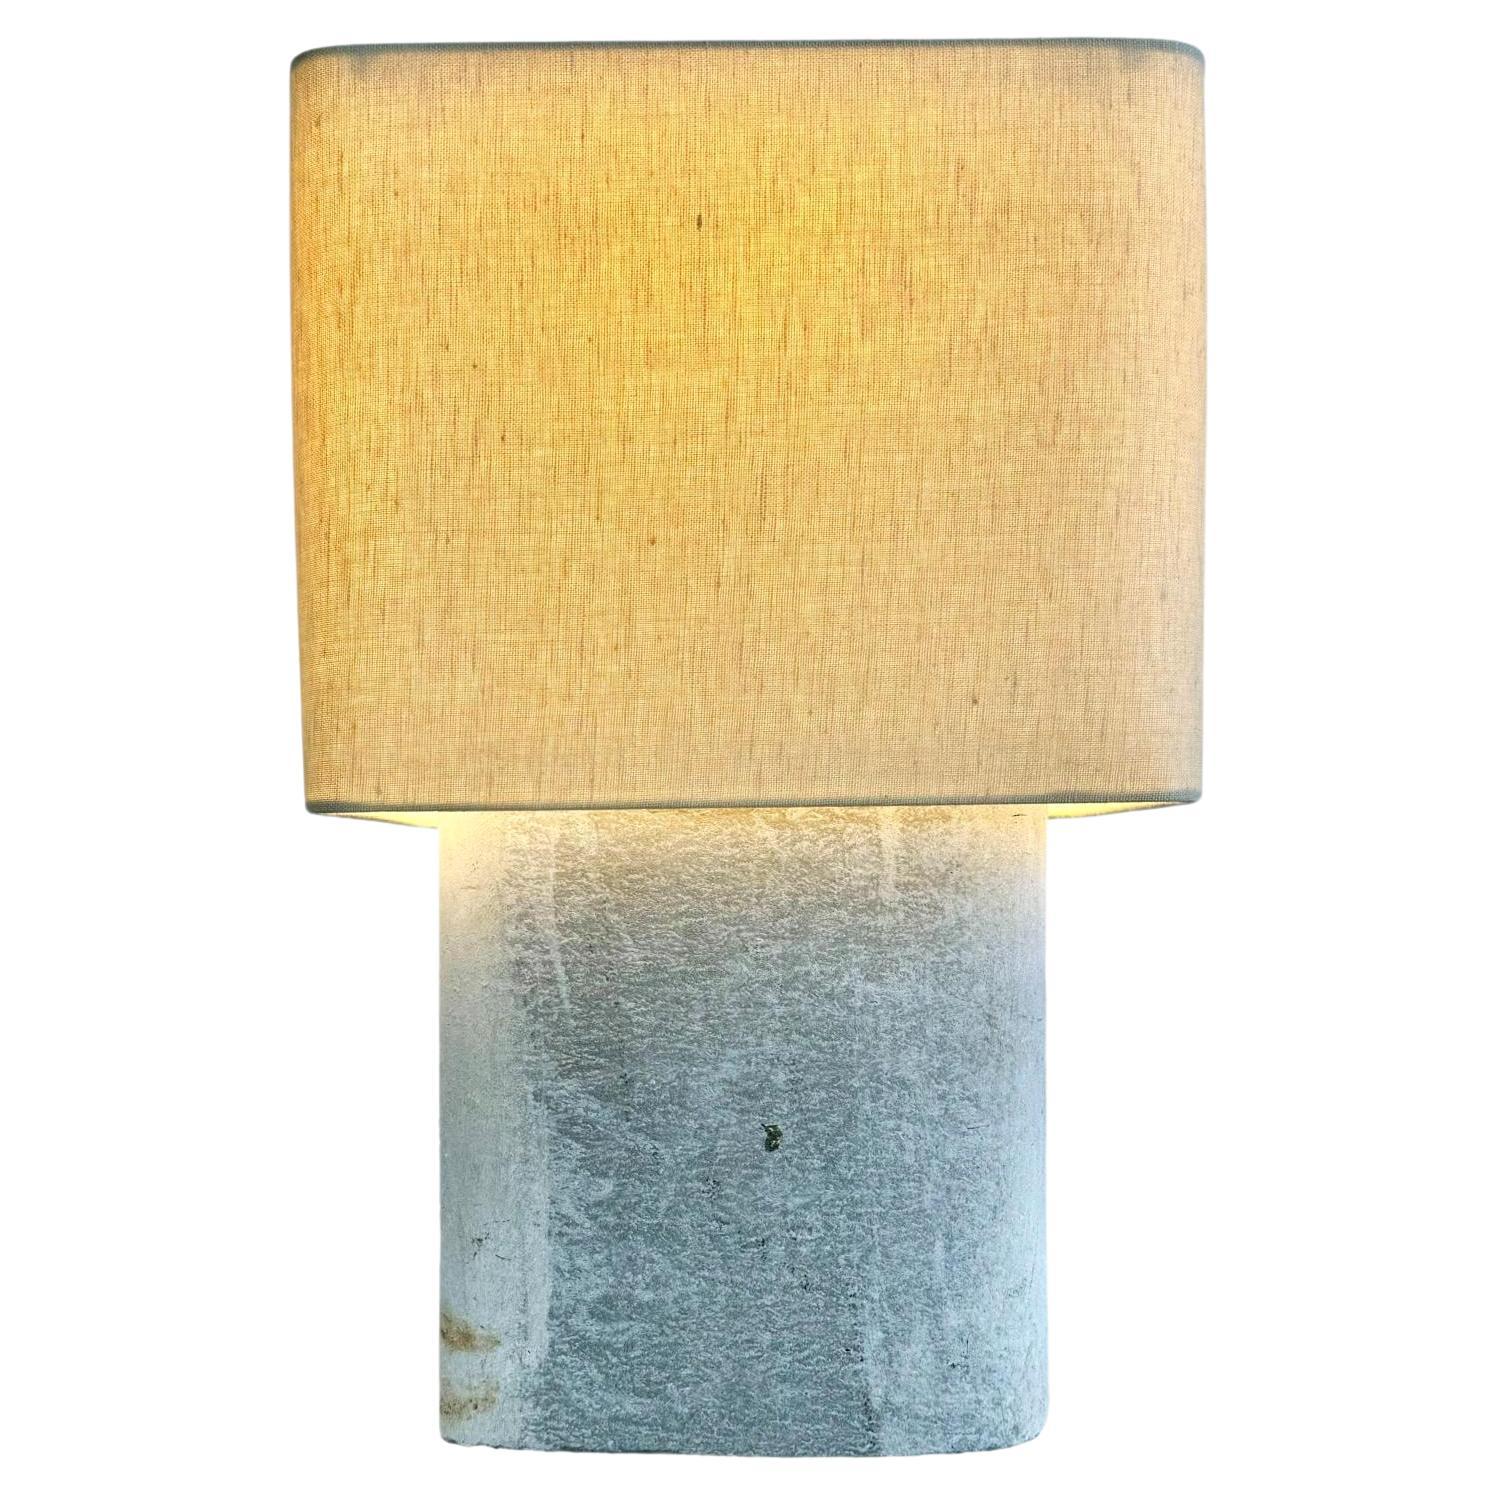 Willy Guhl Concrete Table Lamp, 1960s Switzerland For Sale